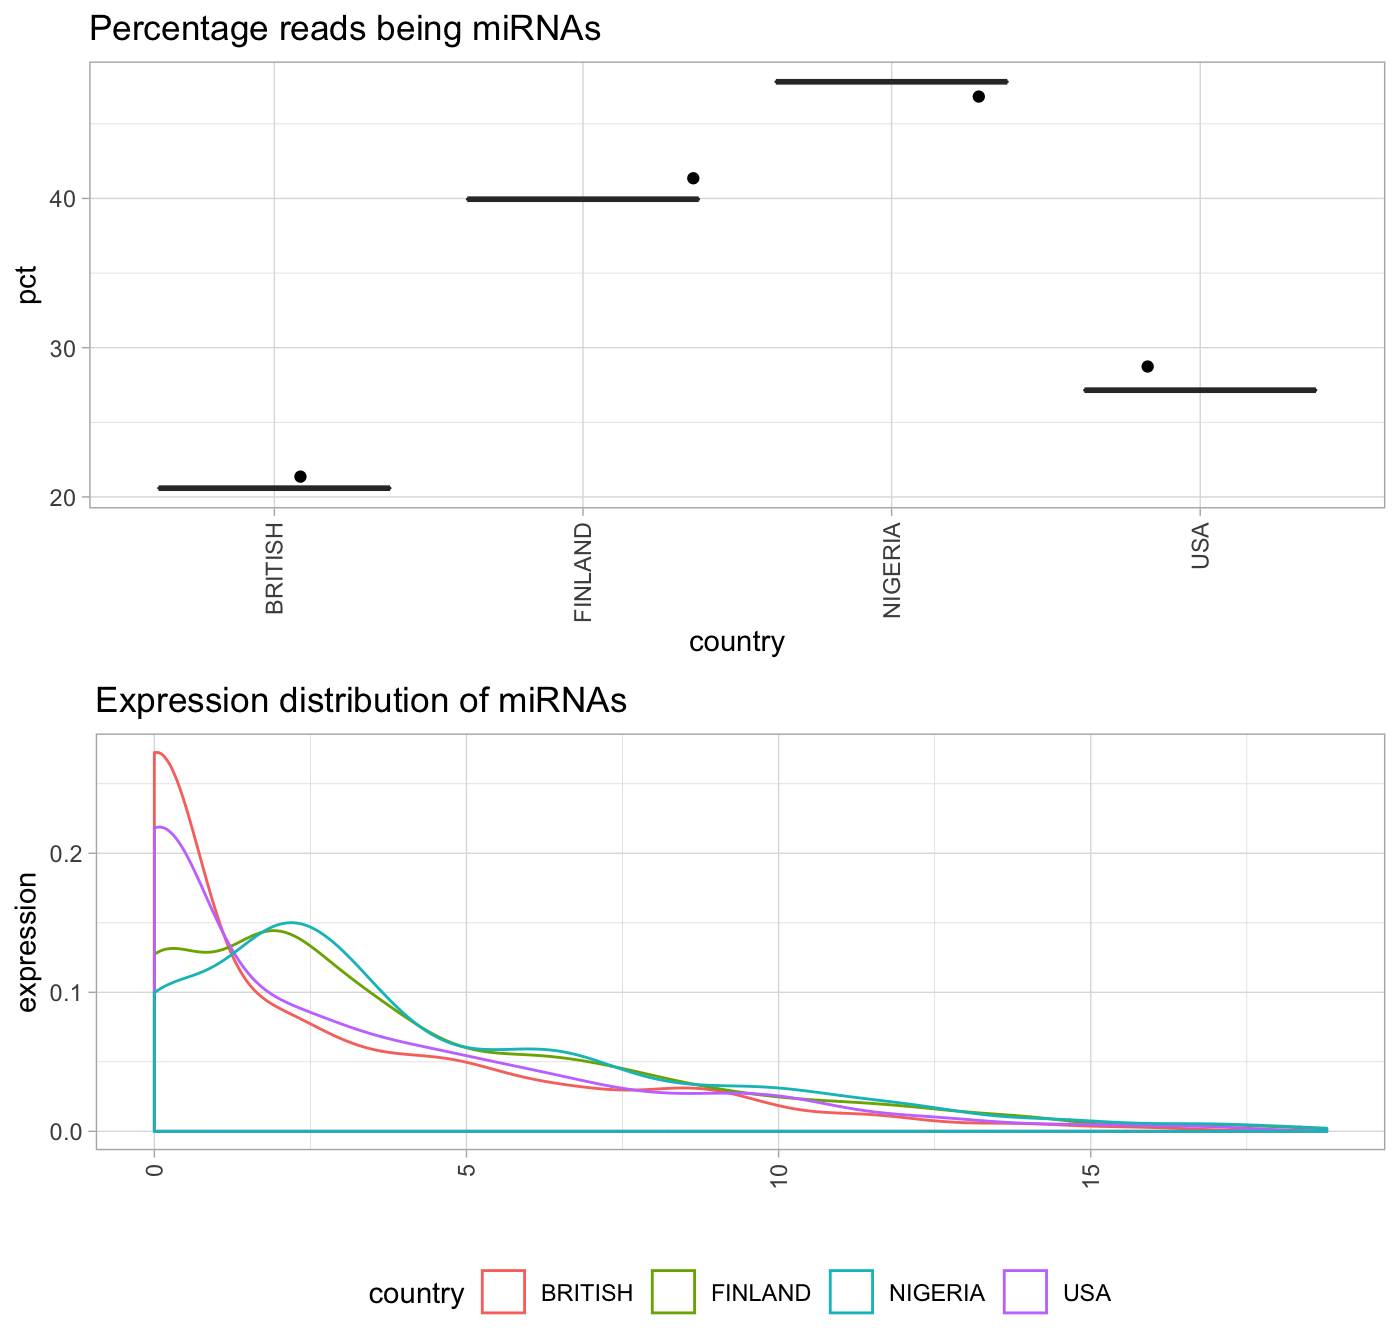 Bottom figure tells how many miRNAs until saturation has been detected. Flatten at low value means few miRNAs capture the majority of the coverage.